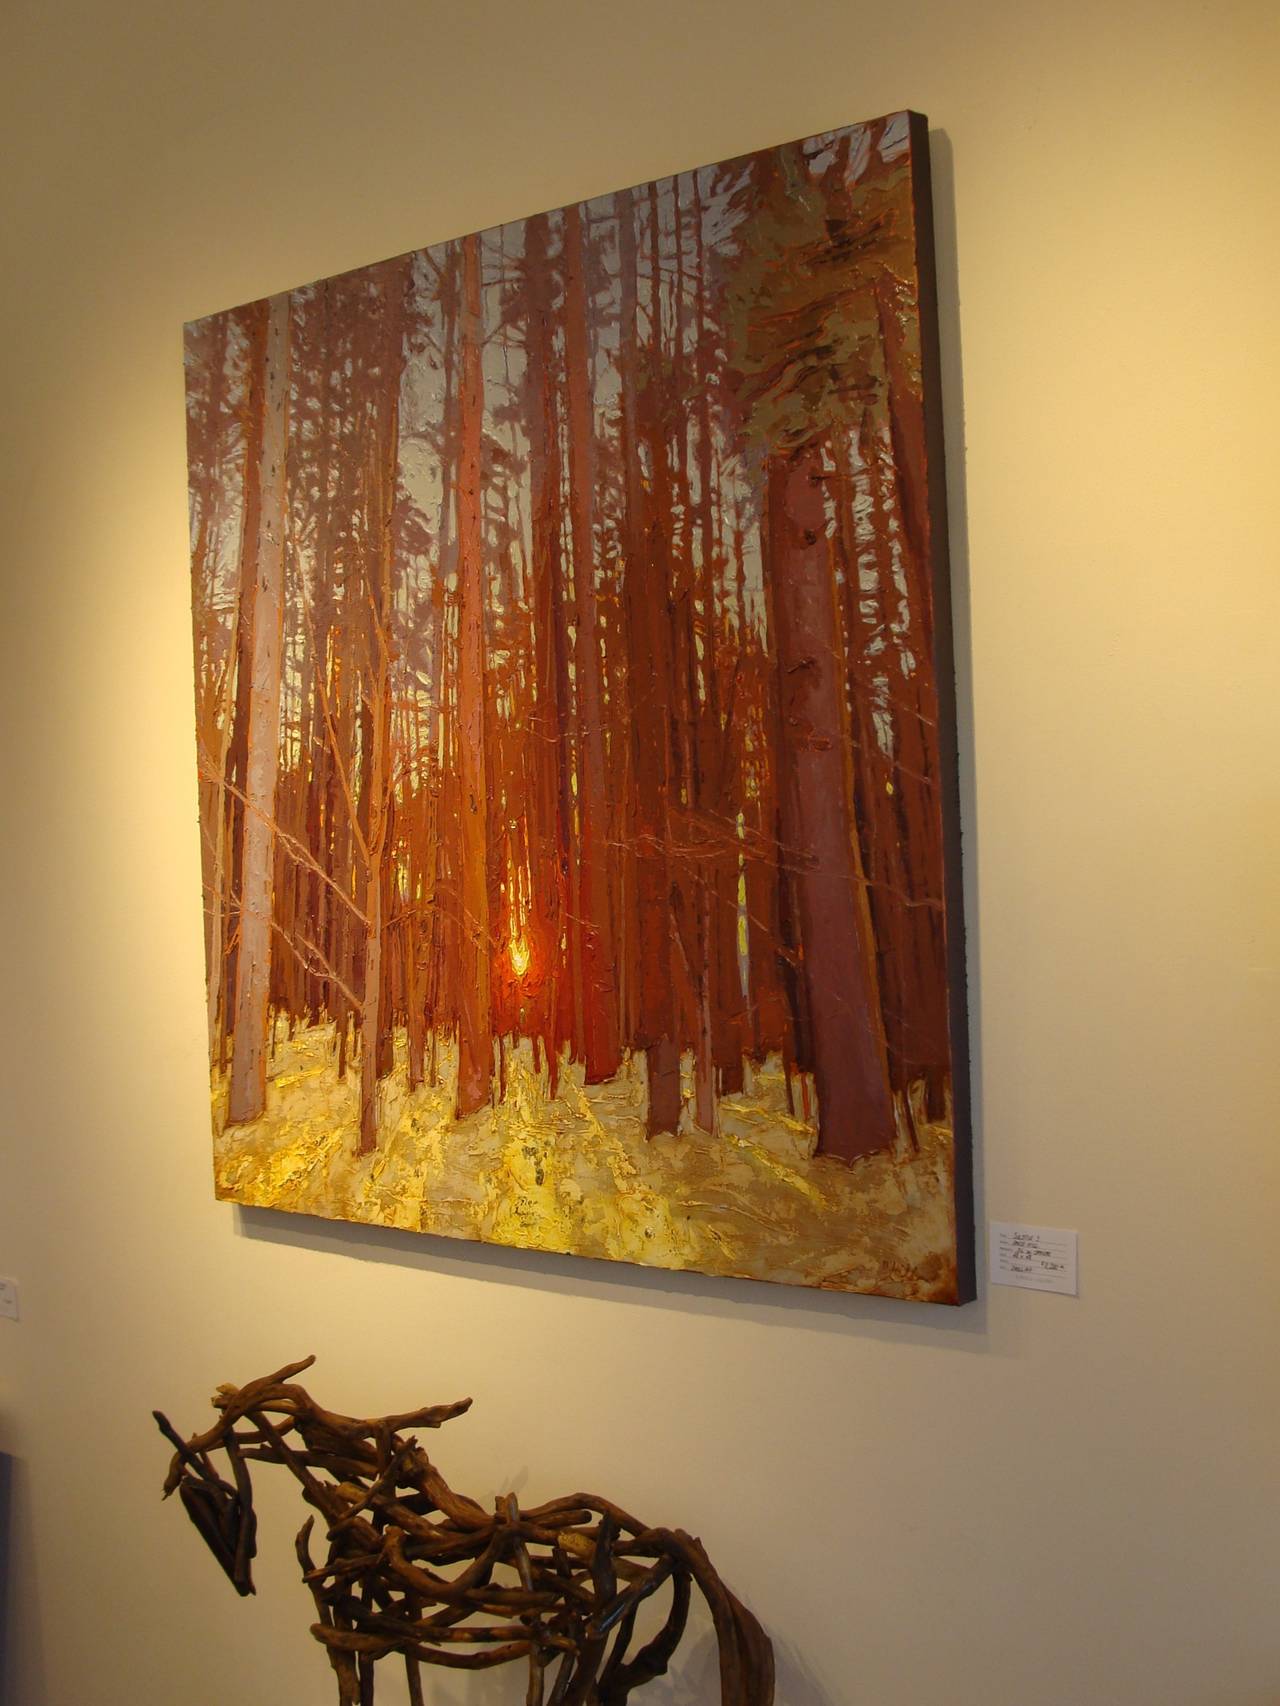 Fiery light flits through majestic trees, illuminating a lushly green forest floor. The paint is applied thickly using a palette knife. Gold leaf is incorporated in the painting to create reflection of sun on the forest ground. 

Born and raised